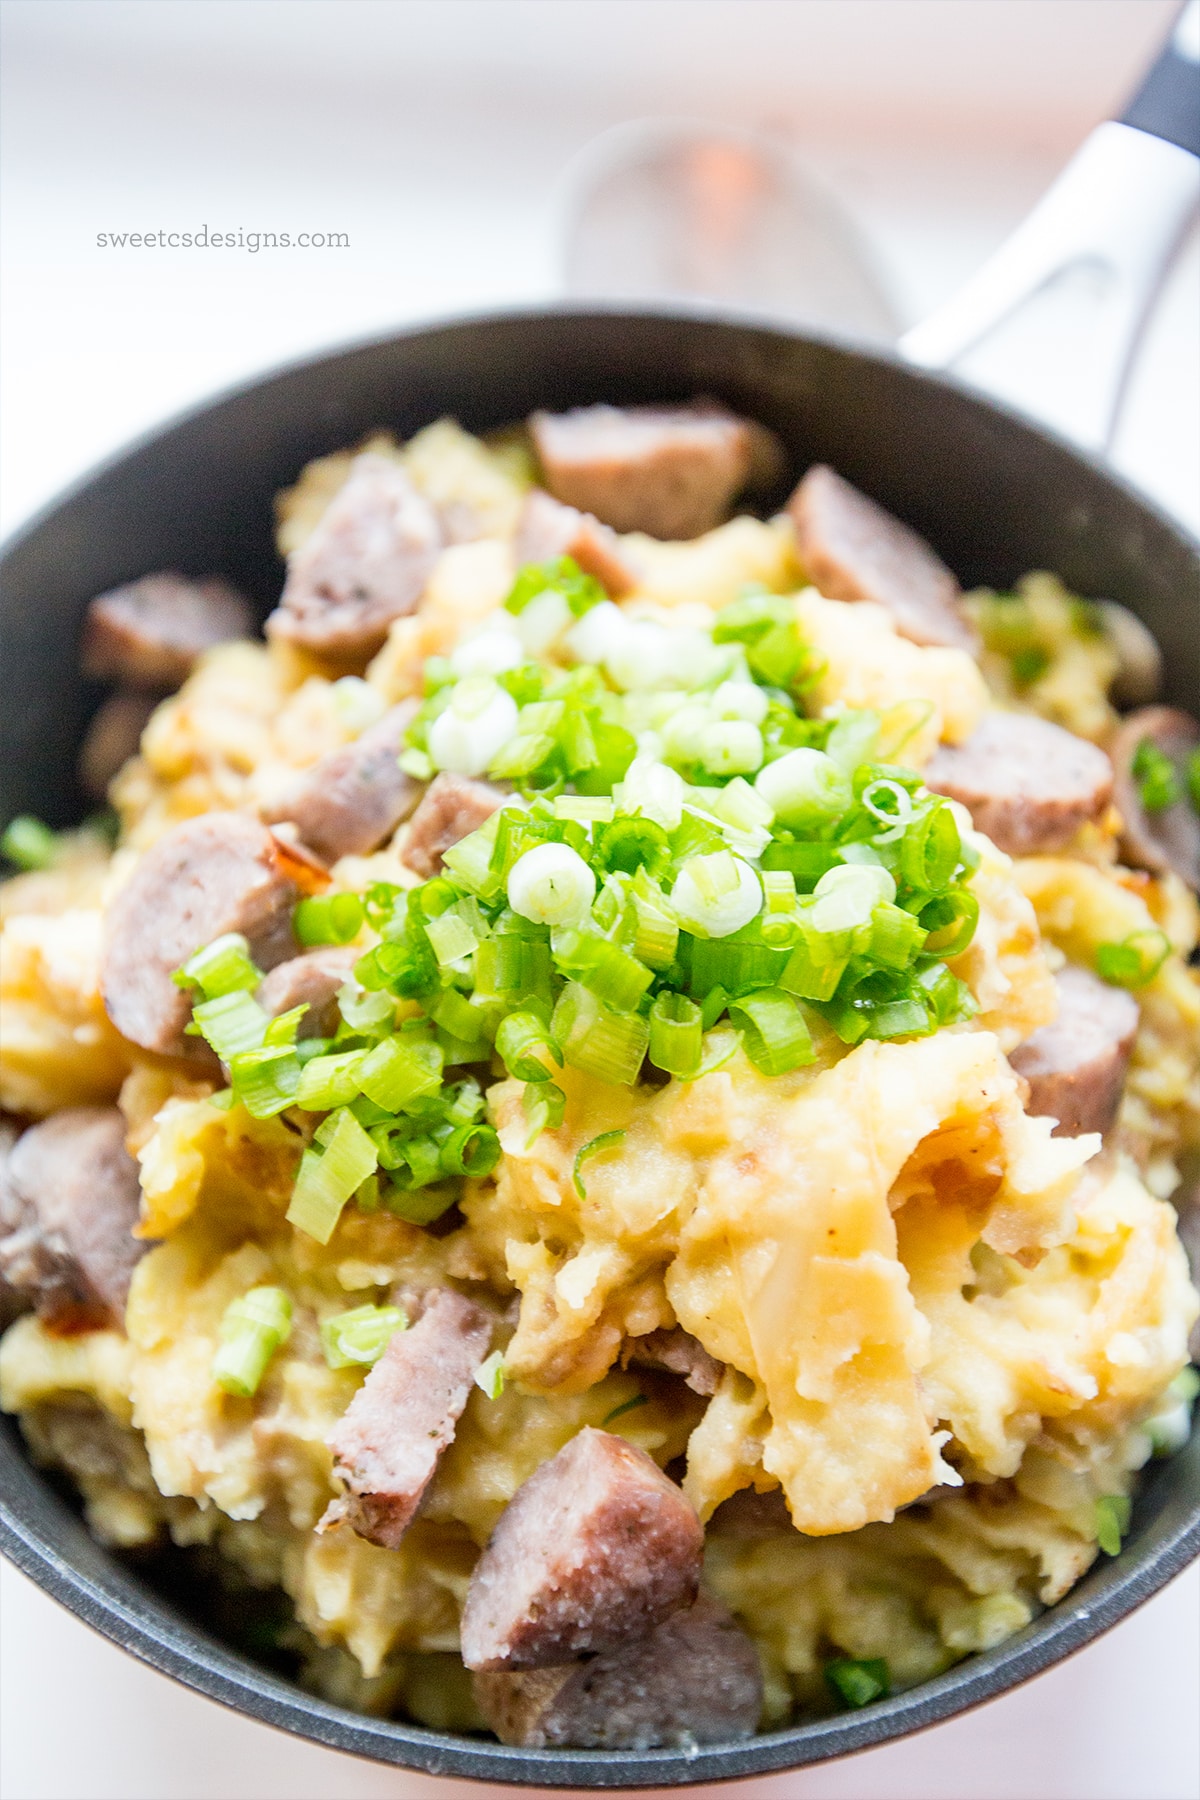 cheesy potatoes and cabbage with bratwurst- this is so delicious and easy!